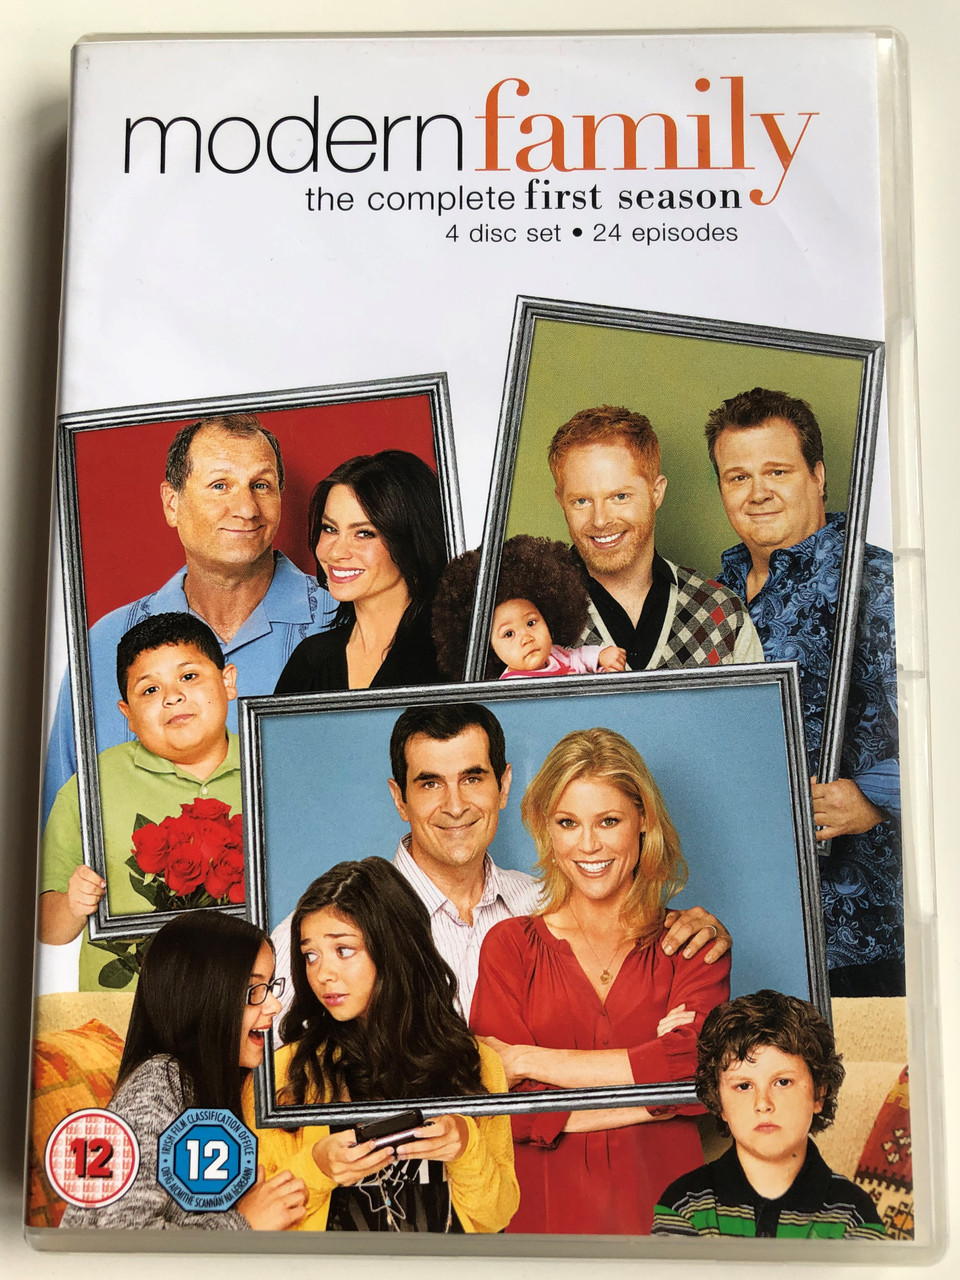 Modern family DVD 2010 4 Disc Set The Complete first season - 24 episodes /  Created by Christopher